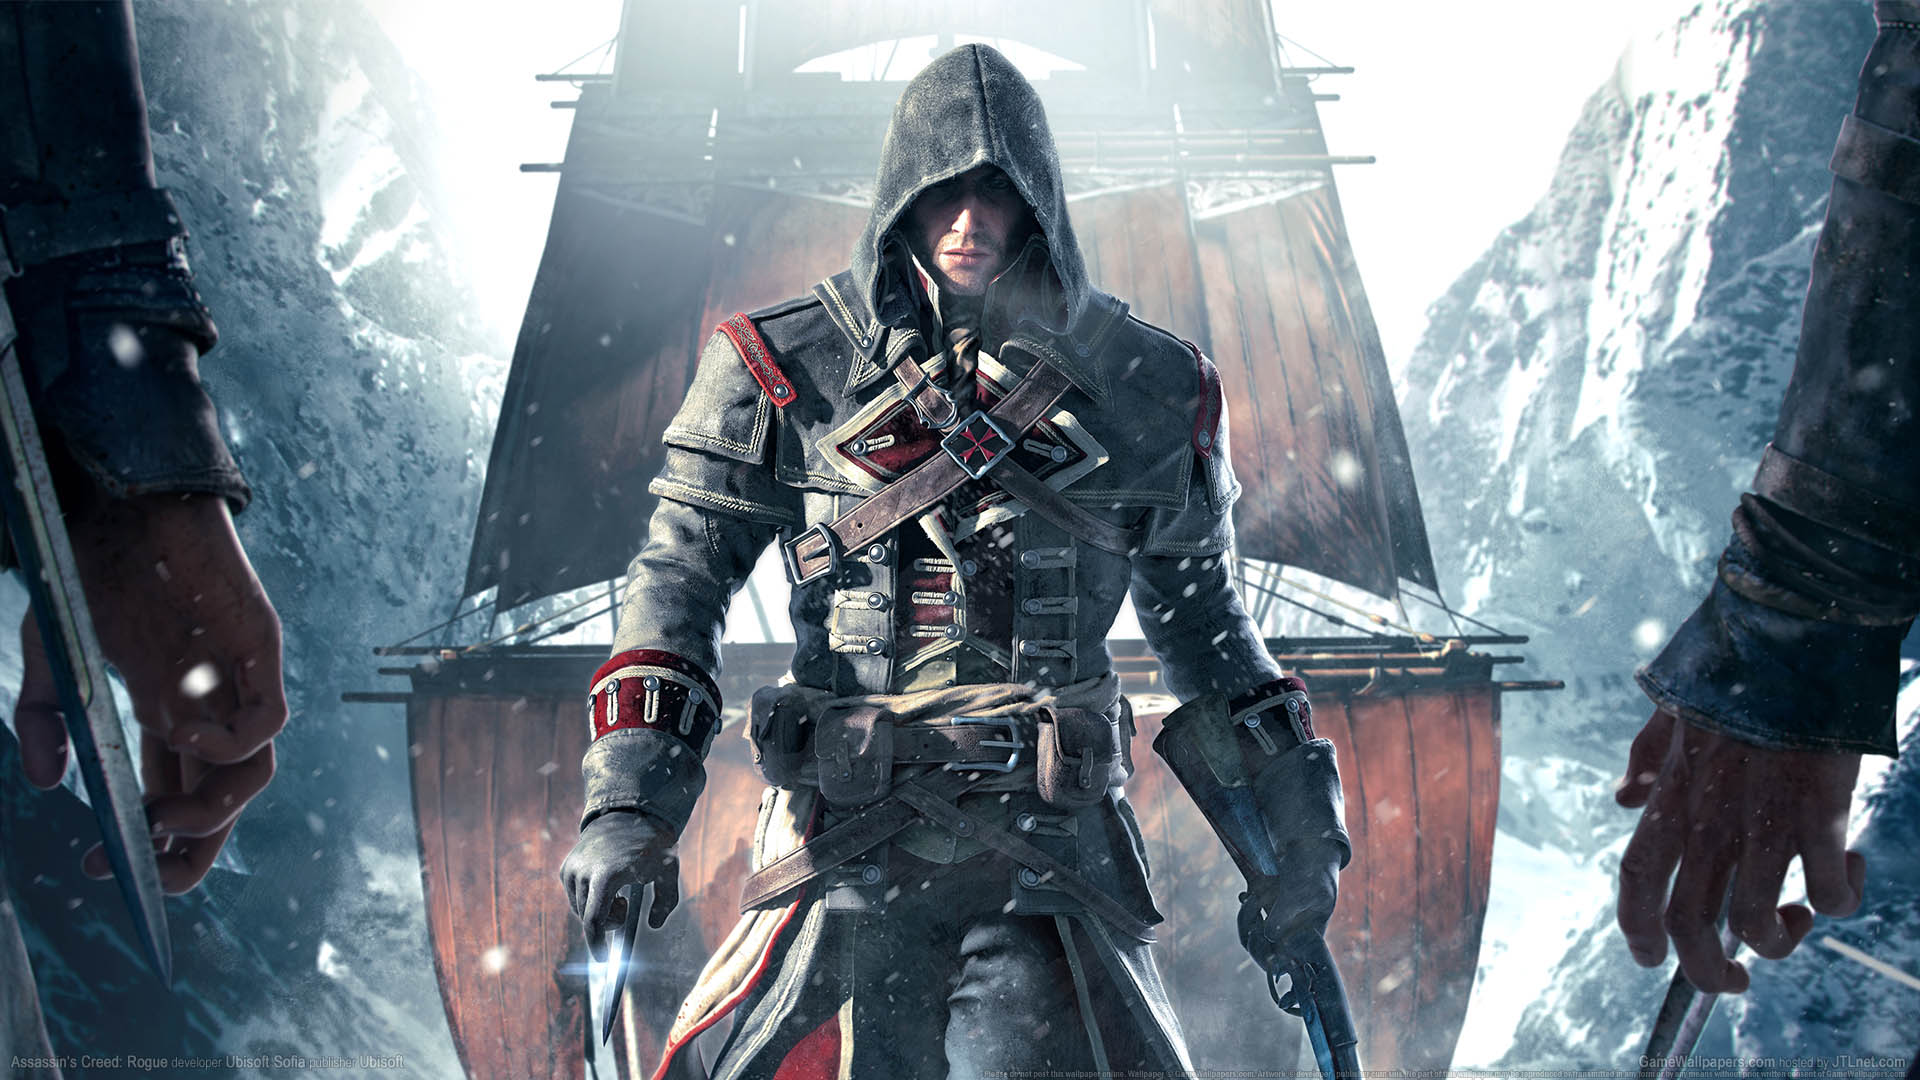 Assassin's Creed: Rogue achtergrond 01 1920x1080